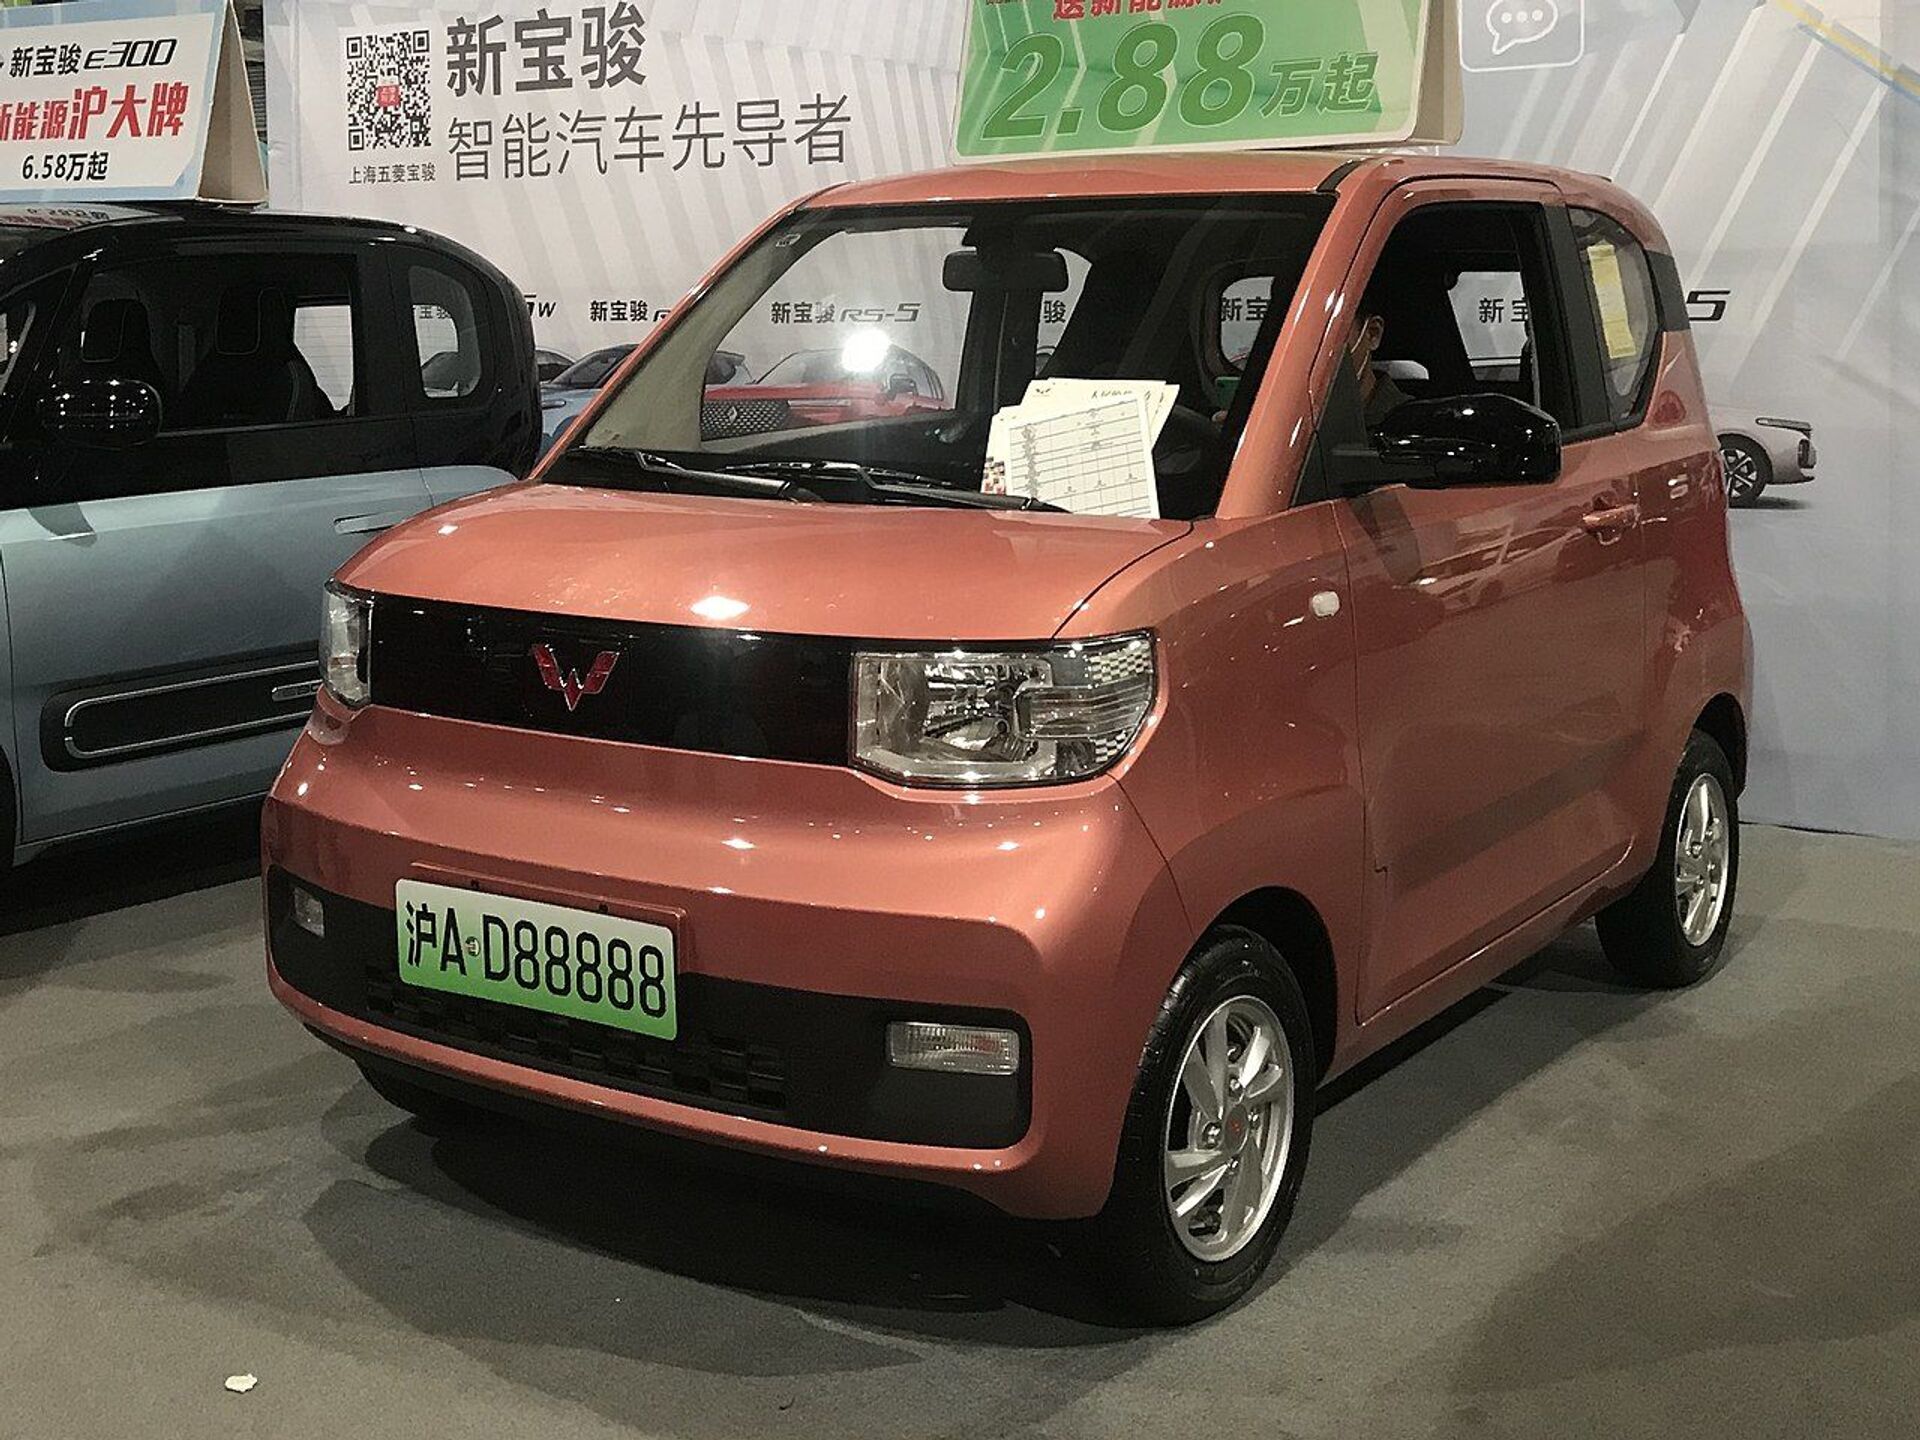 Honk, Move Over Tesla! Tiny Chinese EV Comes Out of Nowhere to Dominate Global Electric Car Market - Sputnik International, 1920, 05.03.2021